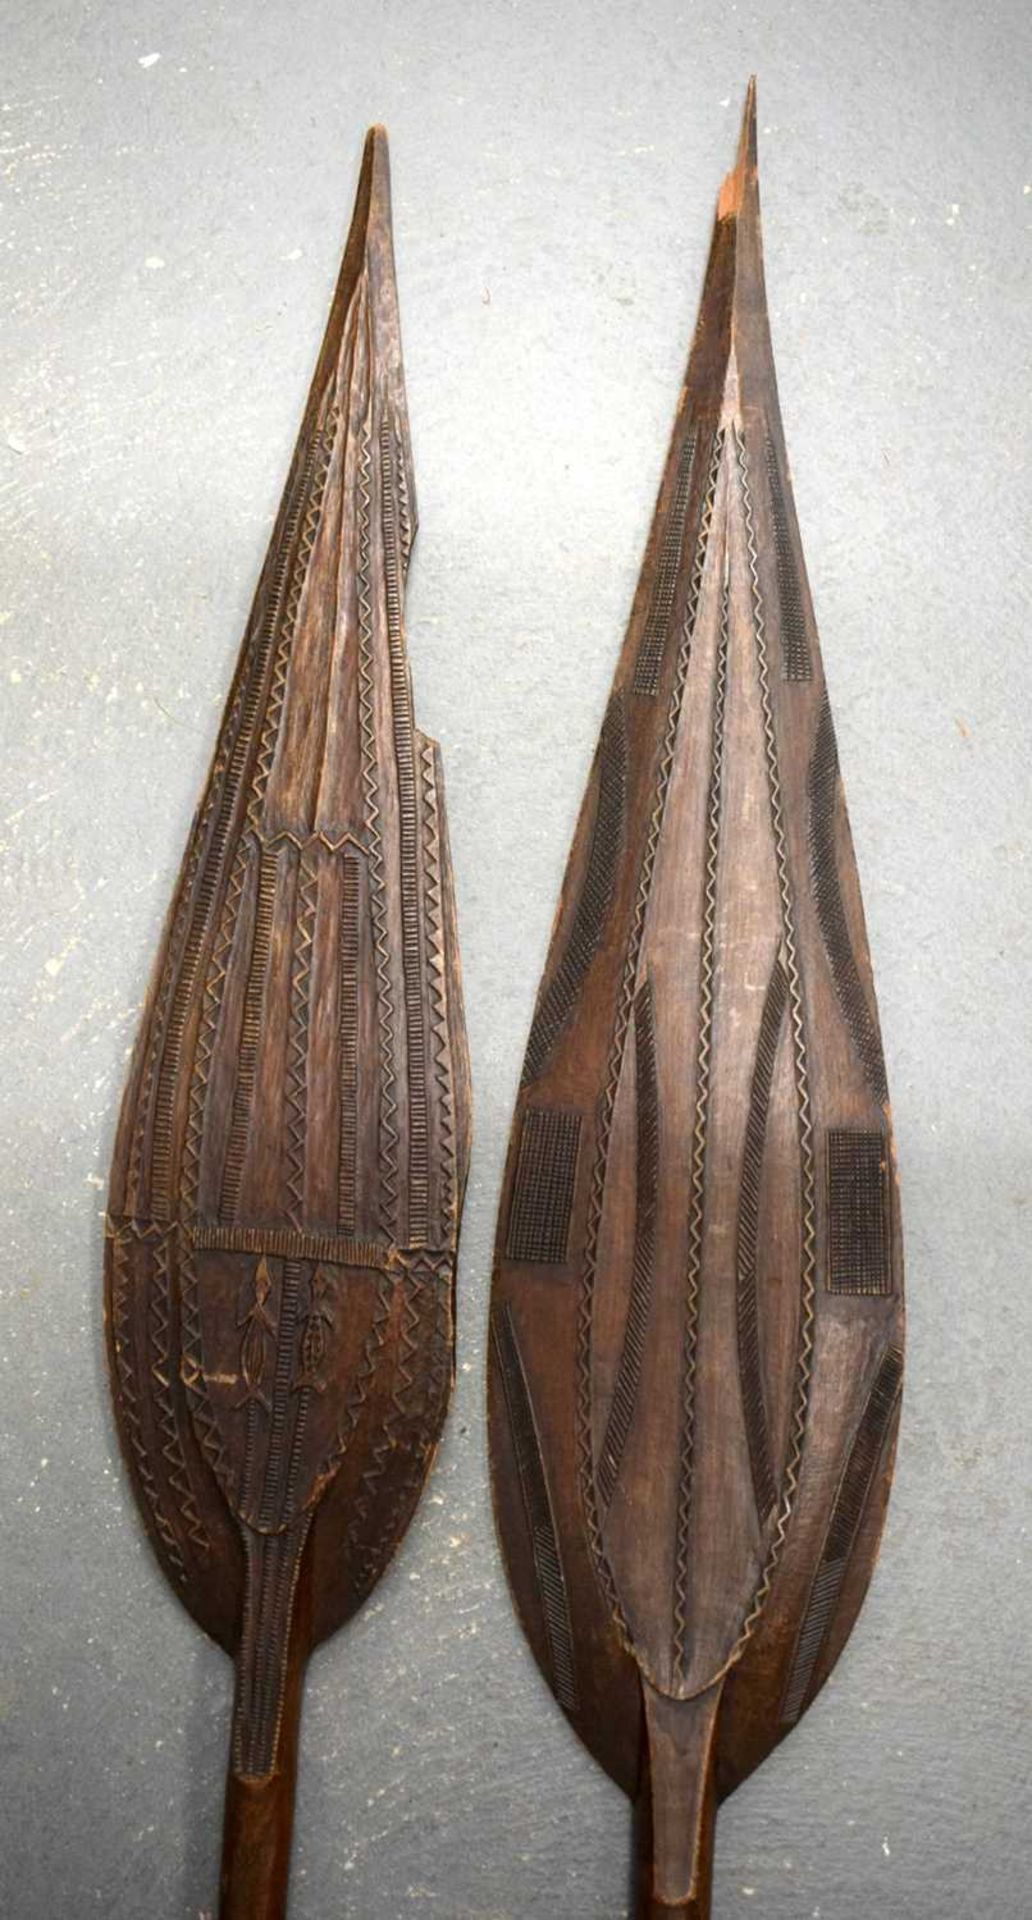 TWO AFRICAN TRIBAL CARVED WOOD PADDLES one decorated with animals, the other with motifs. 160 cm - Image 2 of 13